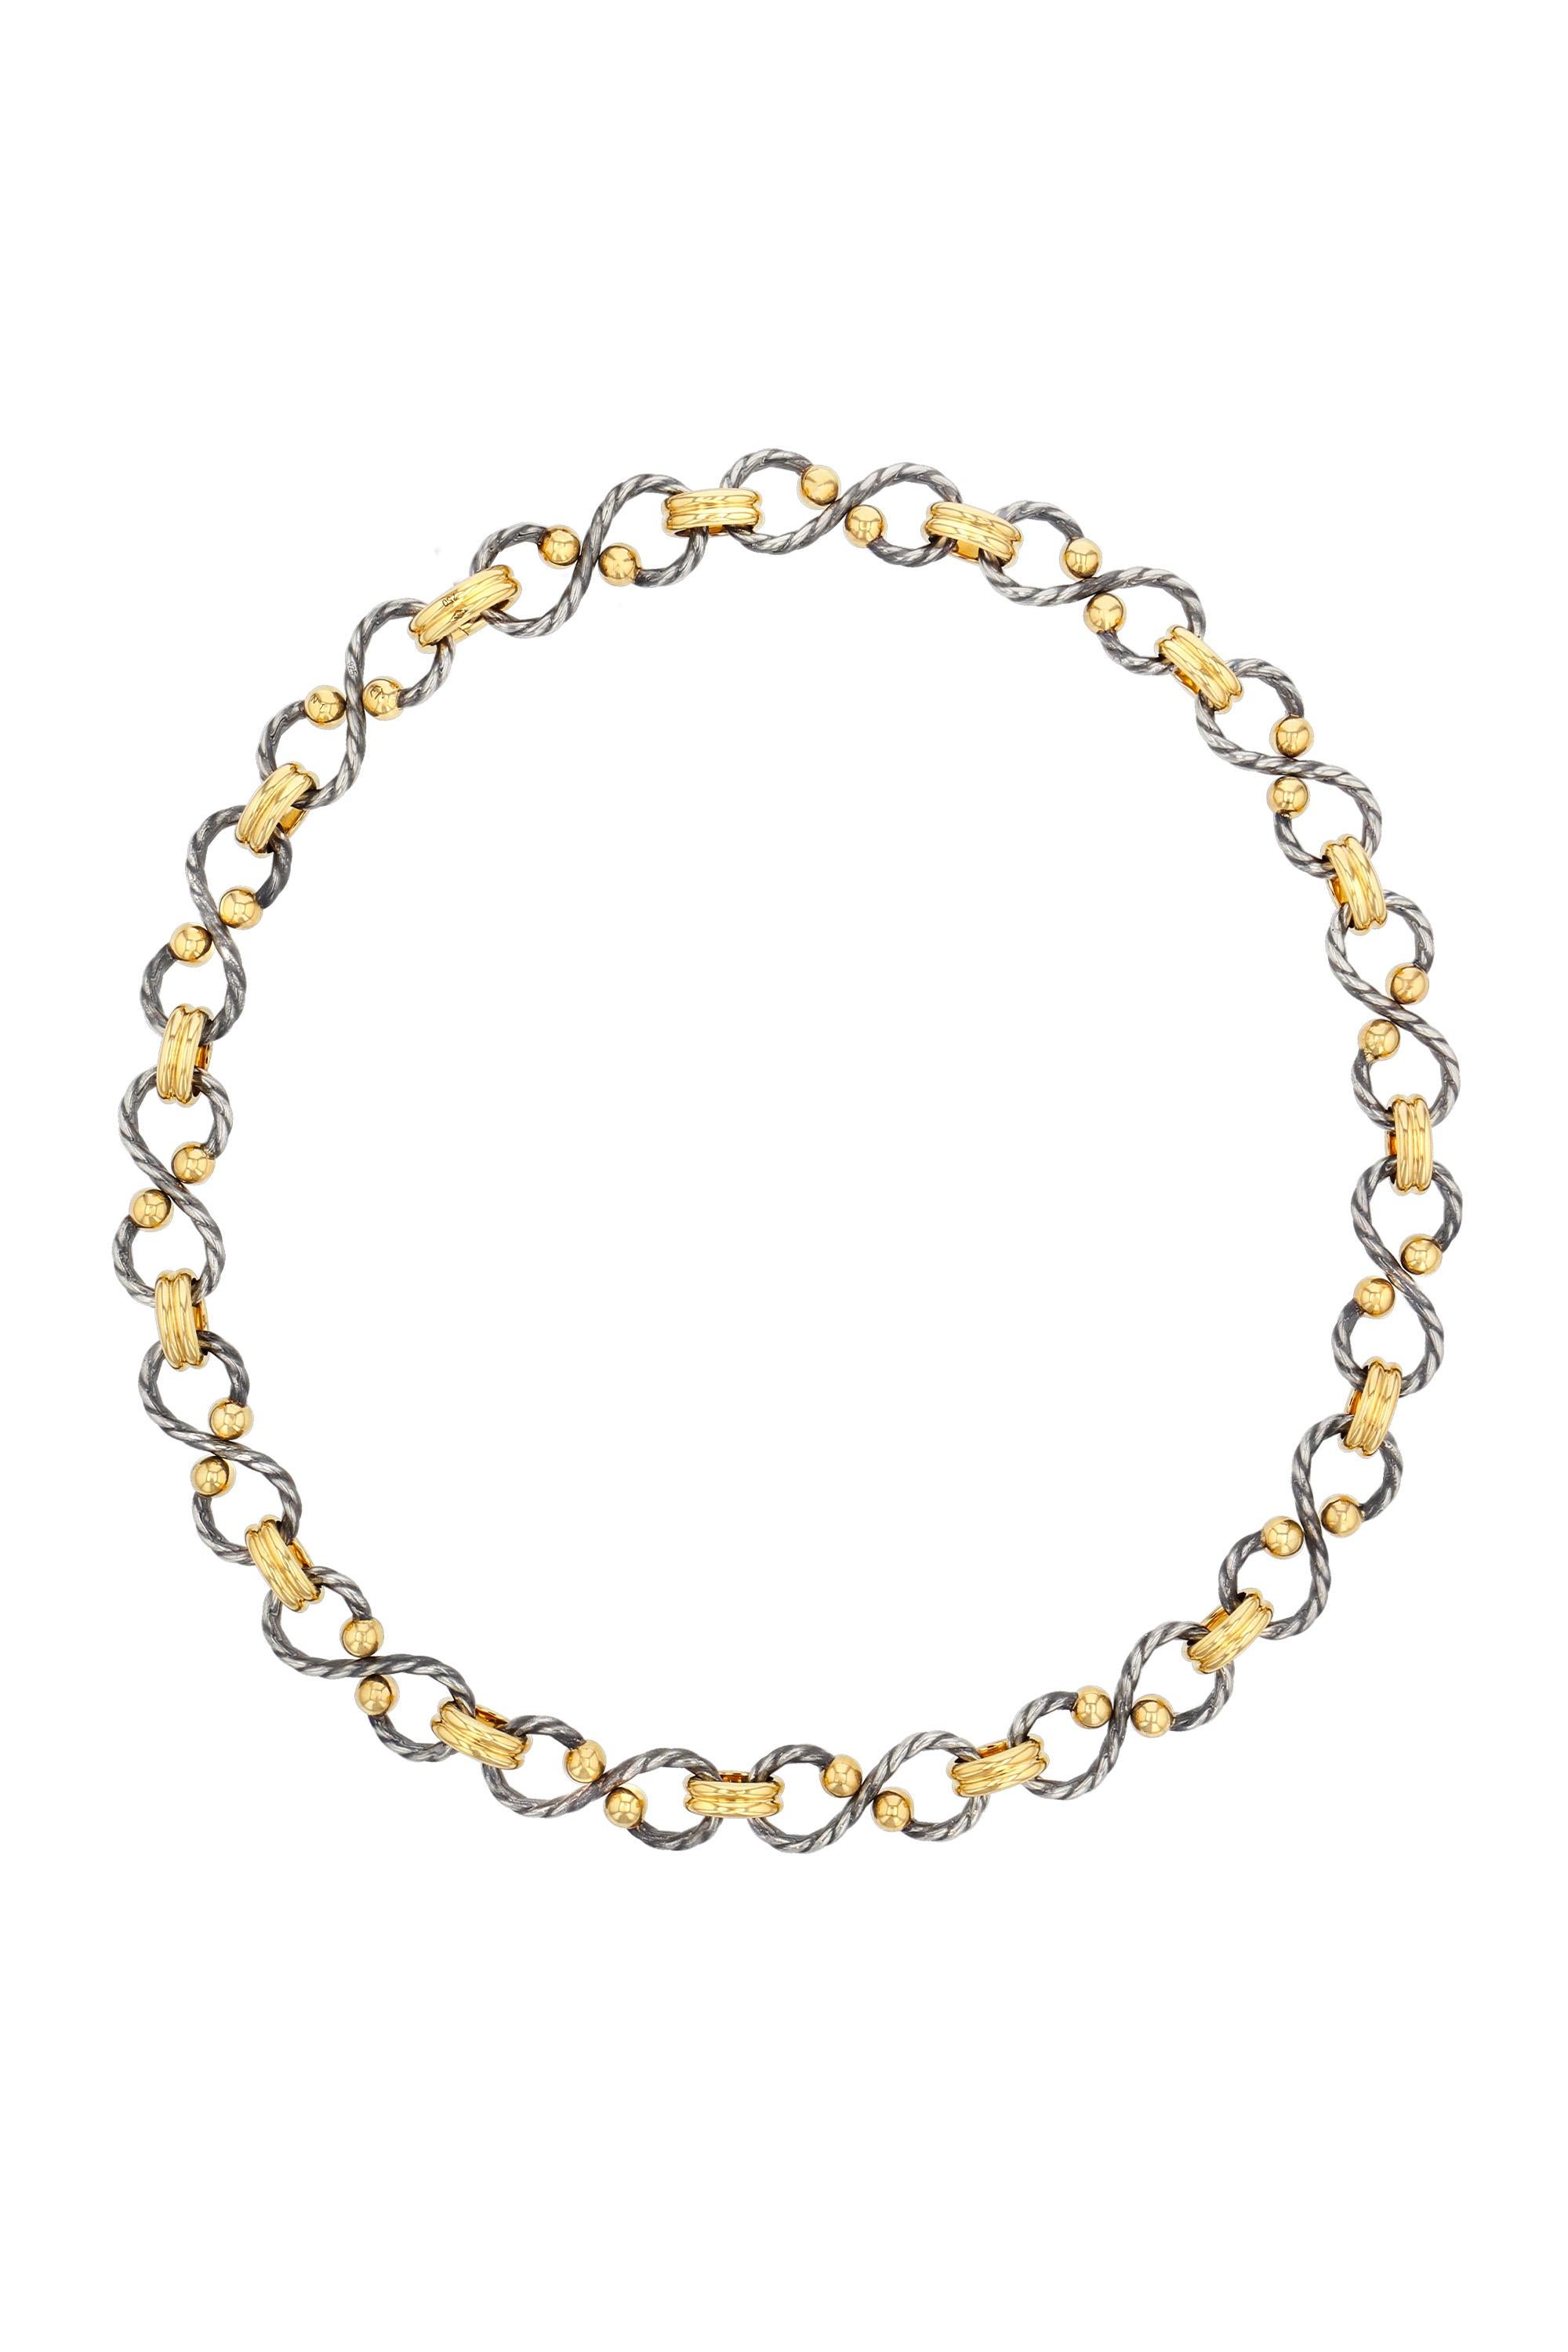 Neoclassical Diamond & Gold Twist Necklace by Elie Top For Sale